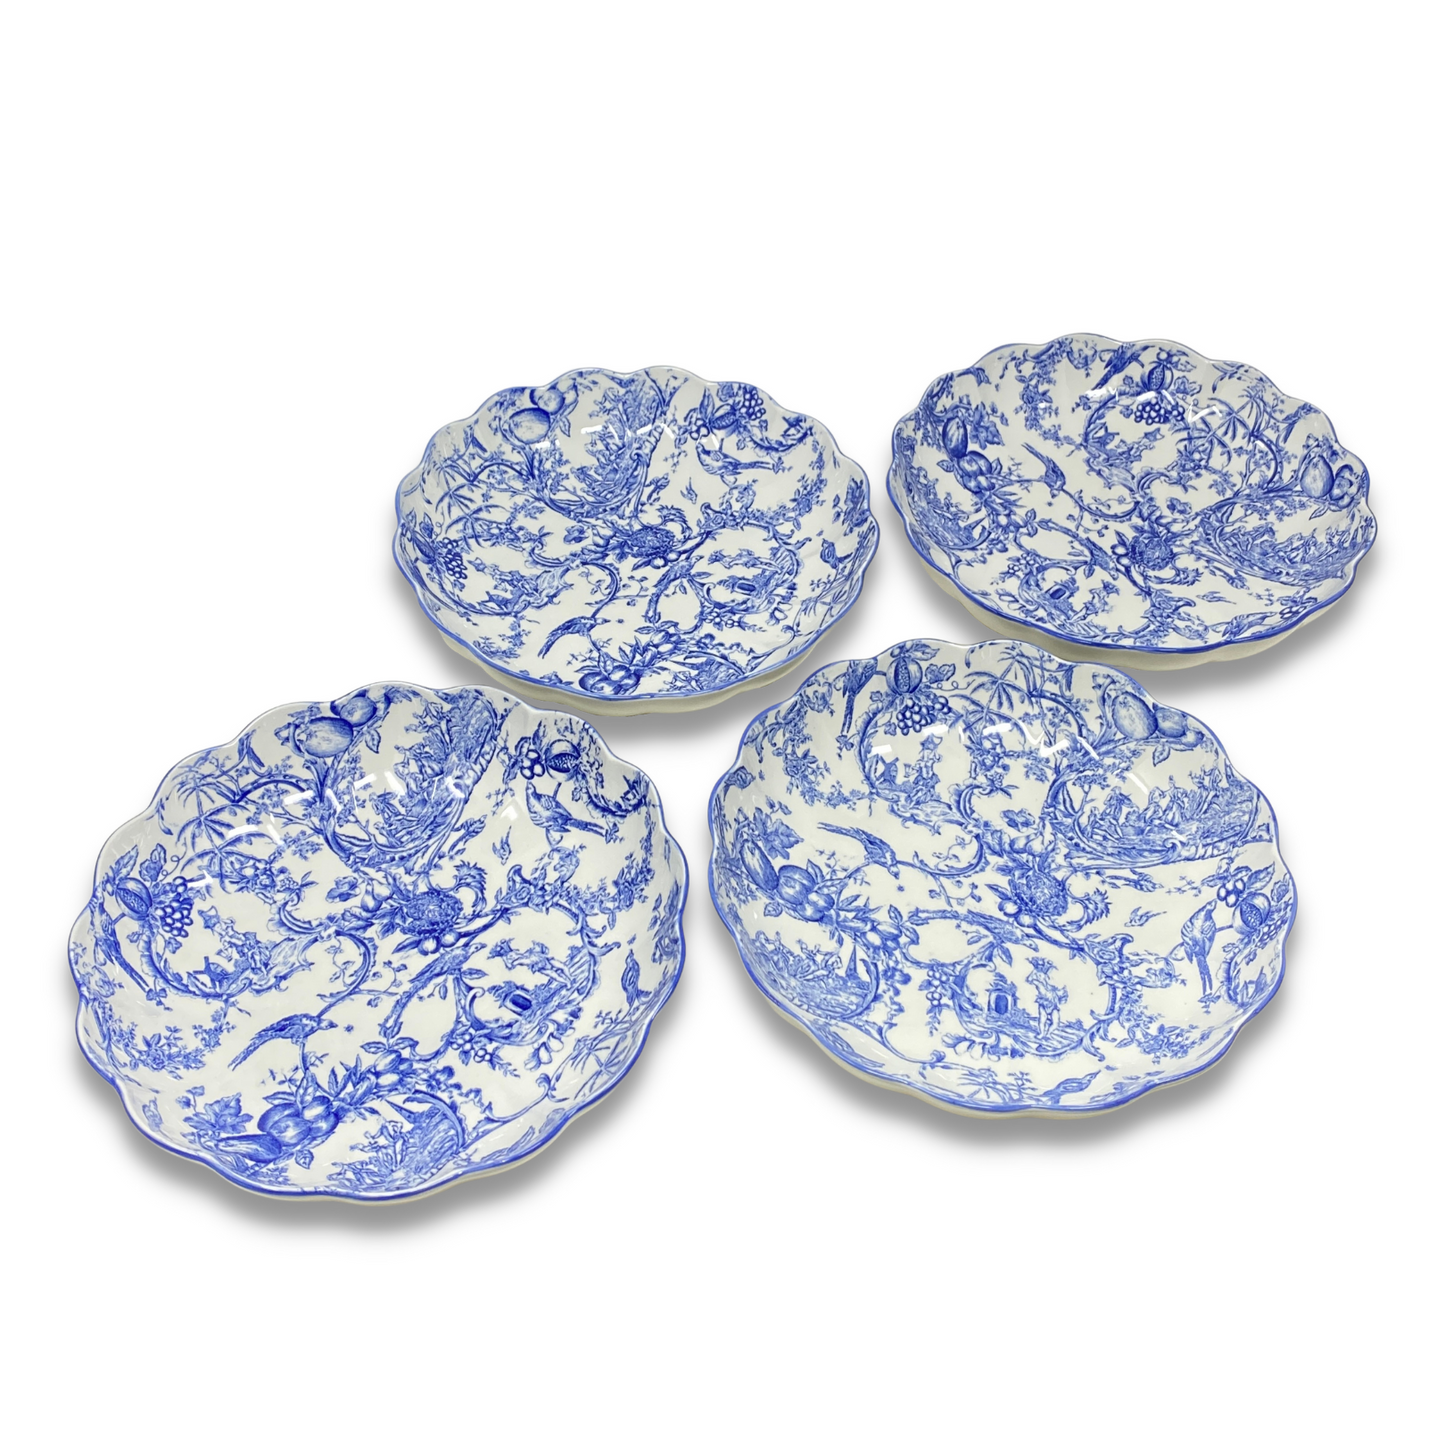 Spode Williamsburg Provincial Garden Blue Large Round Fluted Dishes (4)